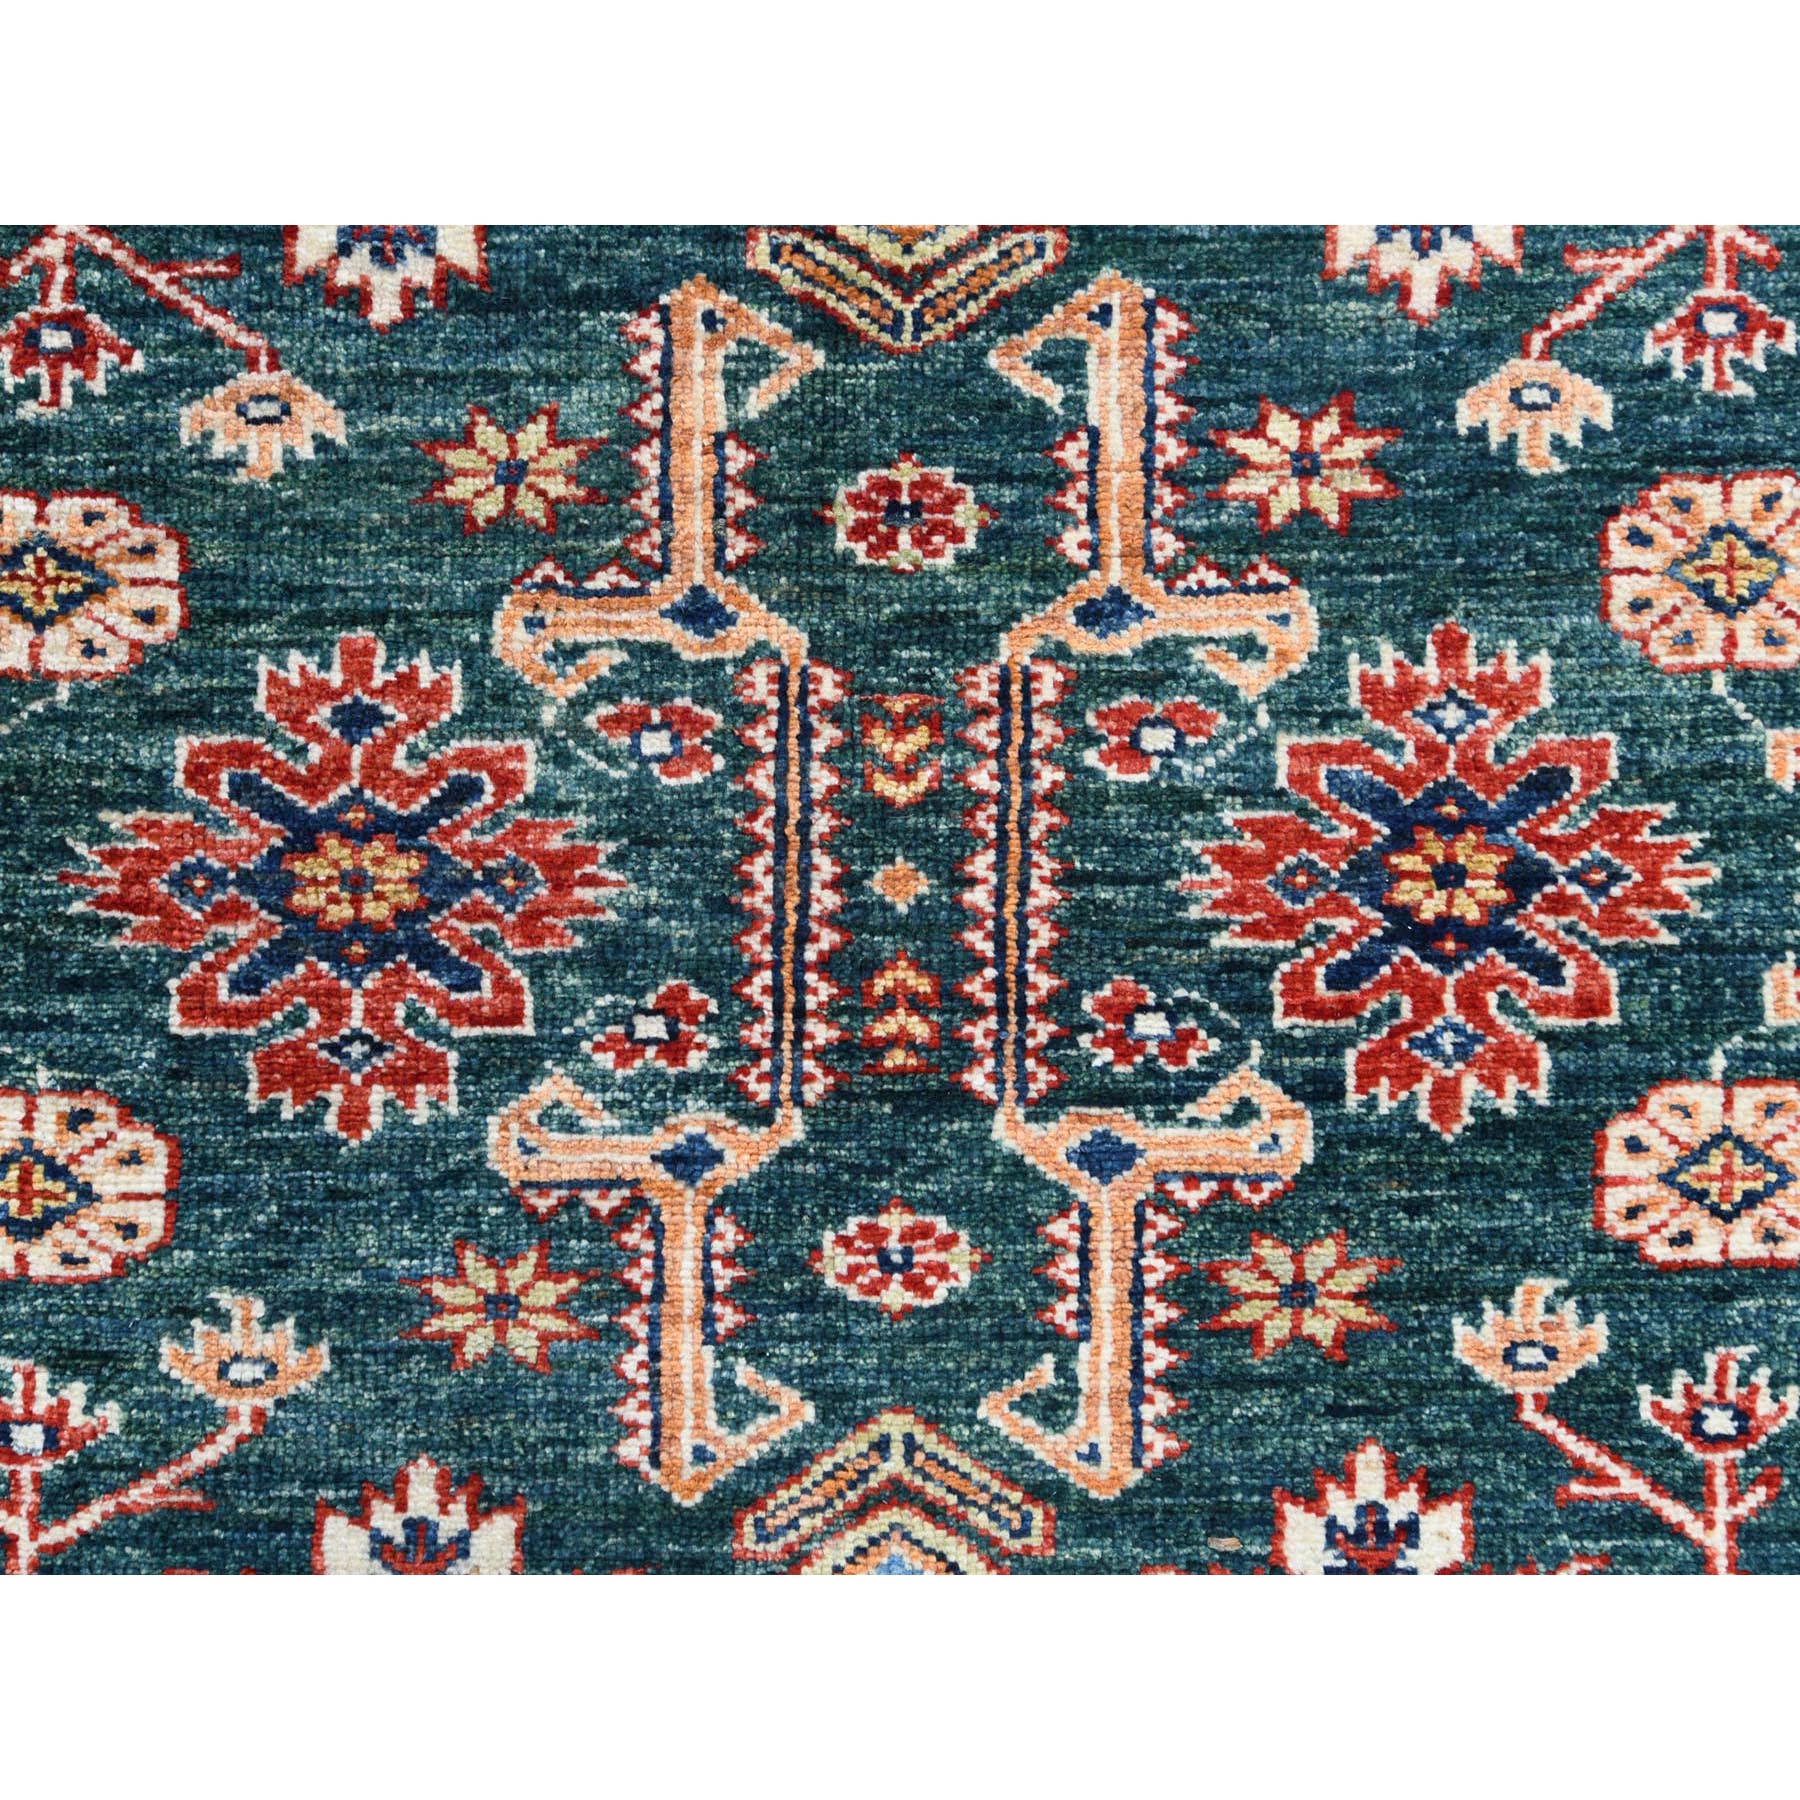 6'x8'5" Extra Soft Wool Hand Woven Dark Green Afghan Super Kazak with All Over Motif Oriental Rug 